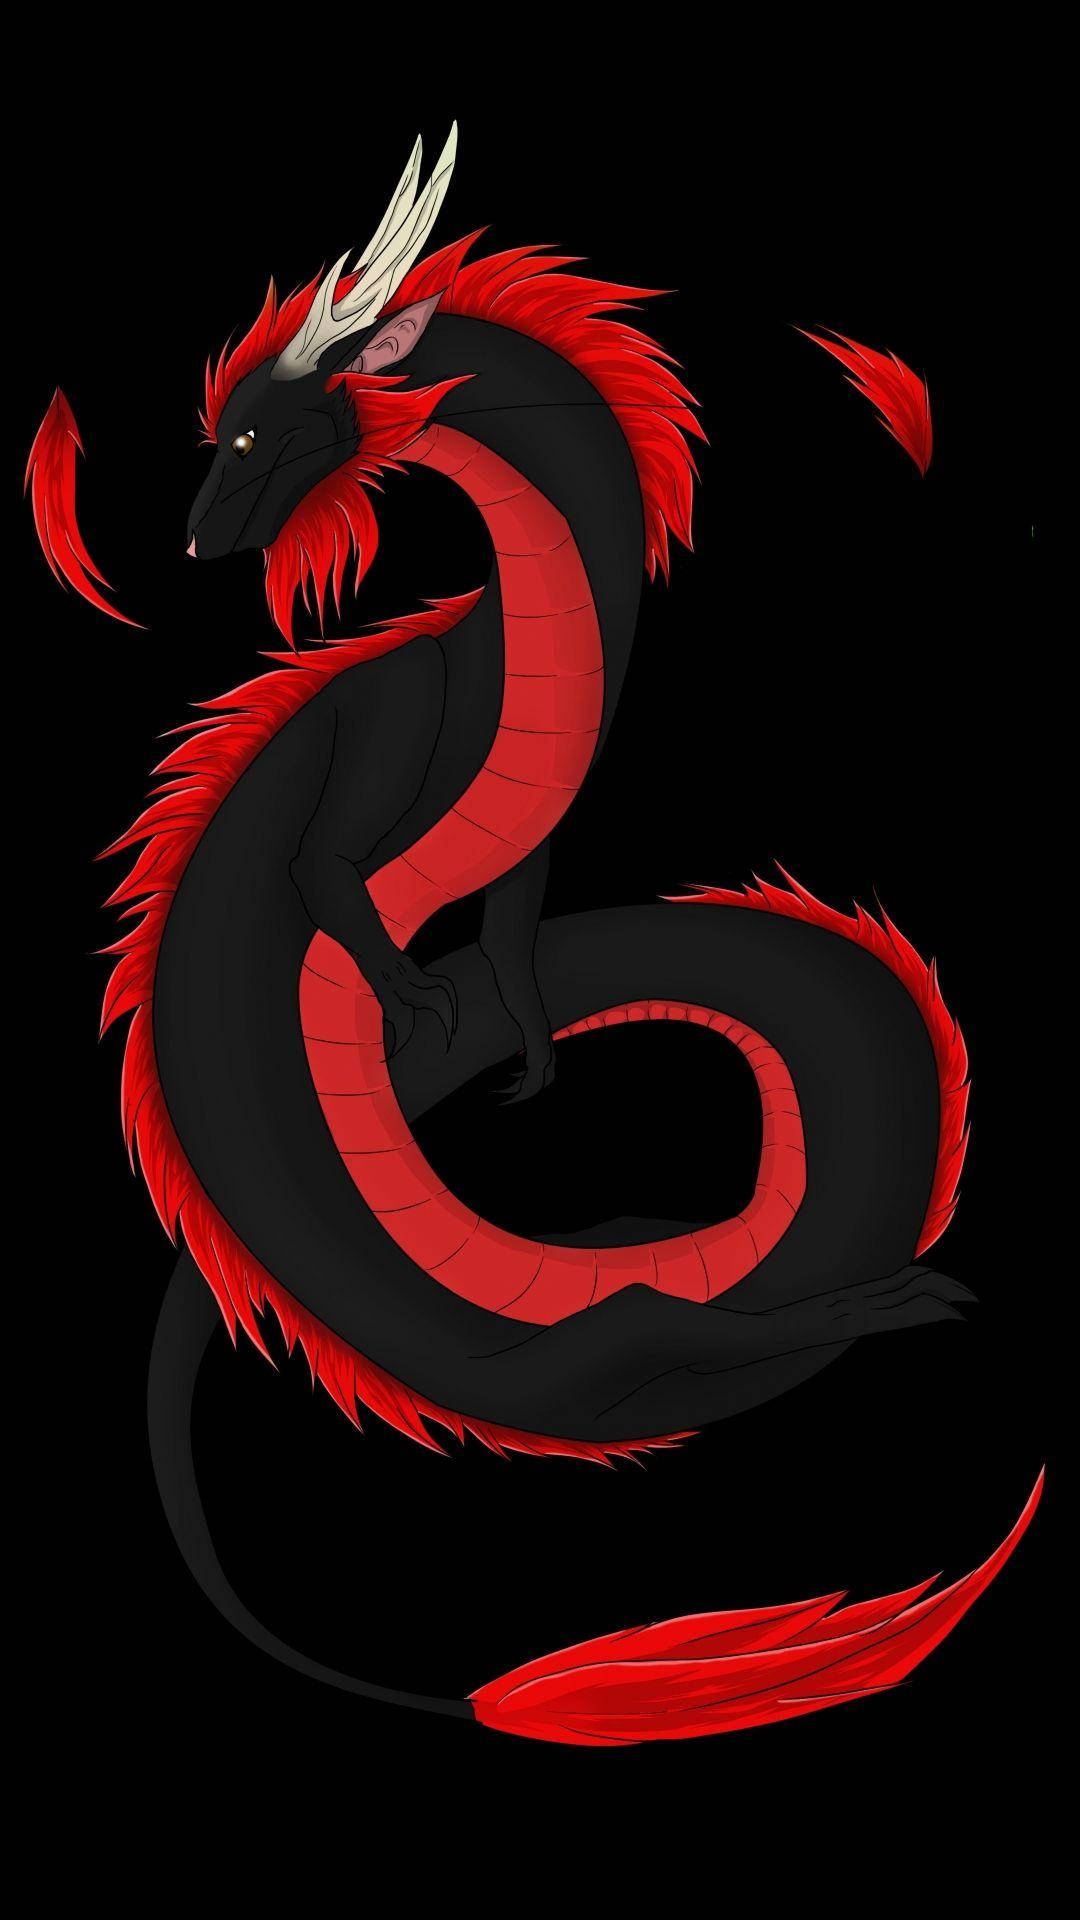 Red And Black Dragon For Iphone Screens